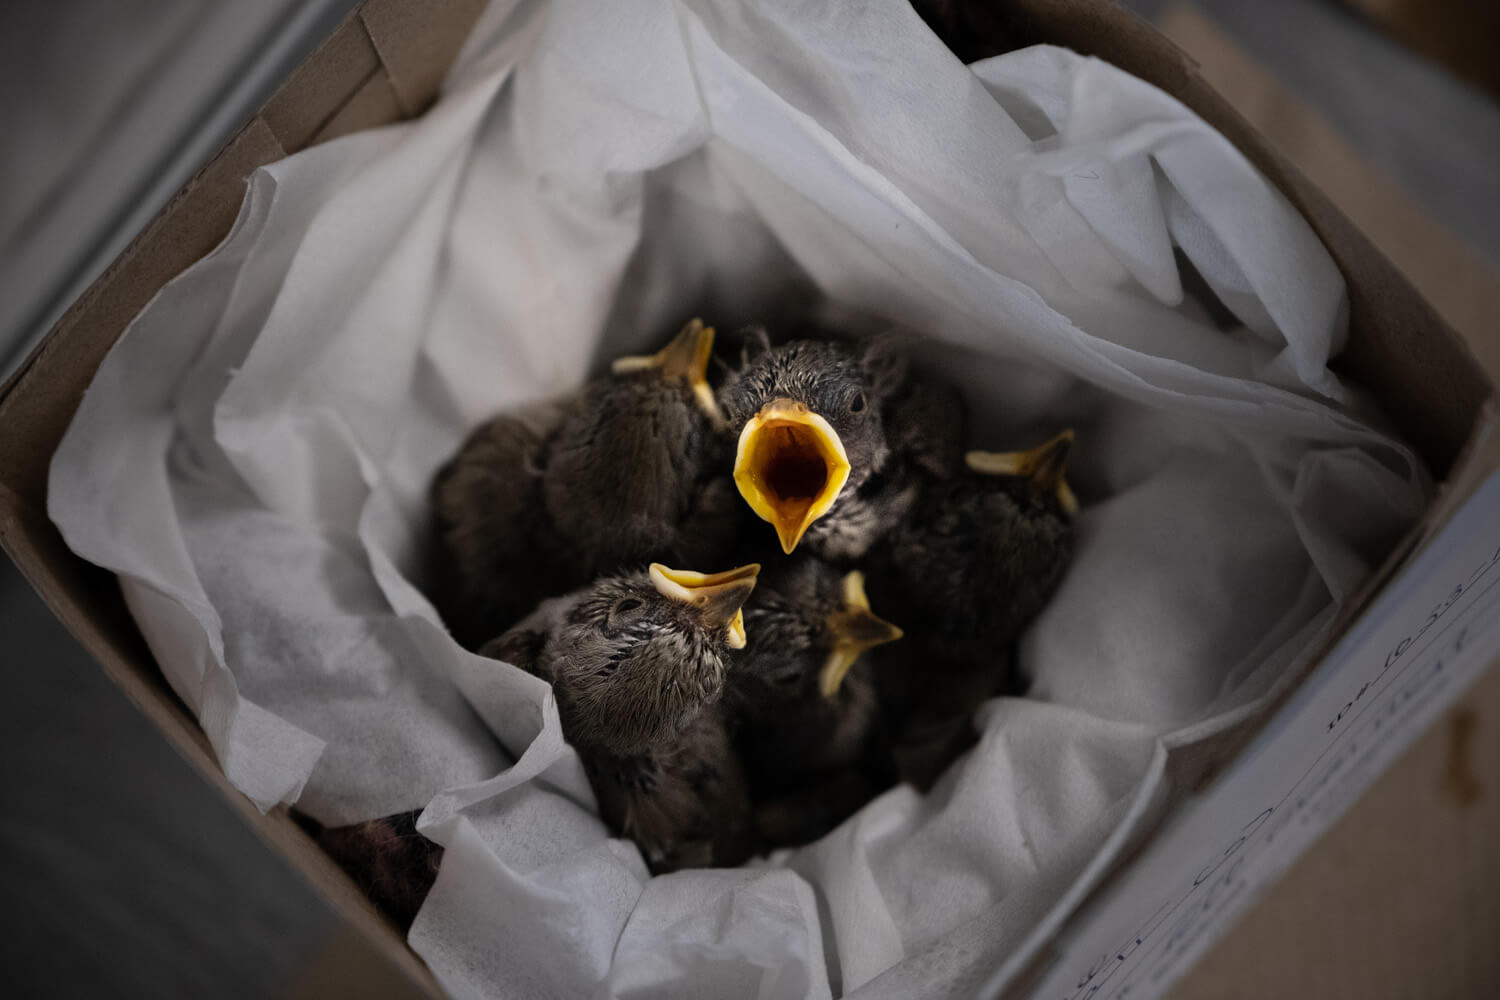 FUJIFILM Exposure Center Article - Be Versatile With Your Vision Using Zoom Lenses. Photograph shows a wide-angle image of rescue chicks in a man-made nest reaching upwards towards the camera with their mouths open.